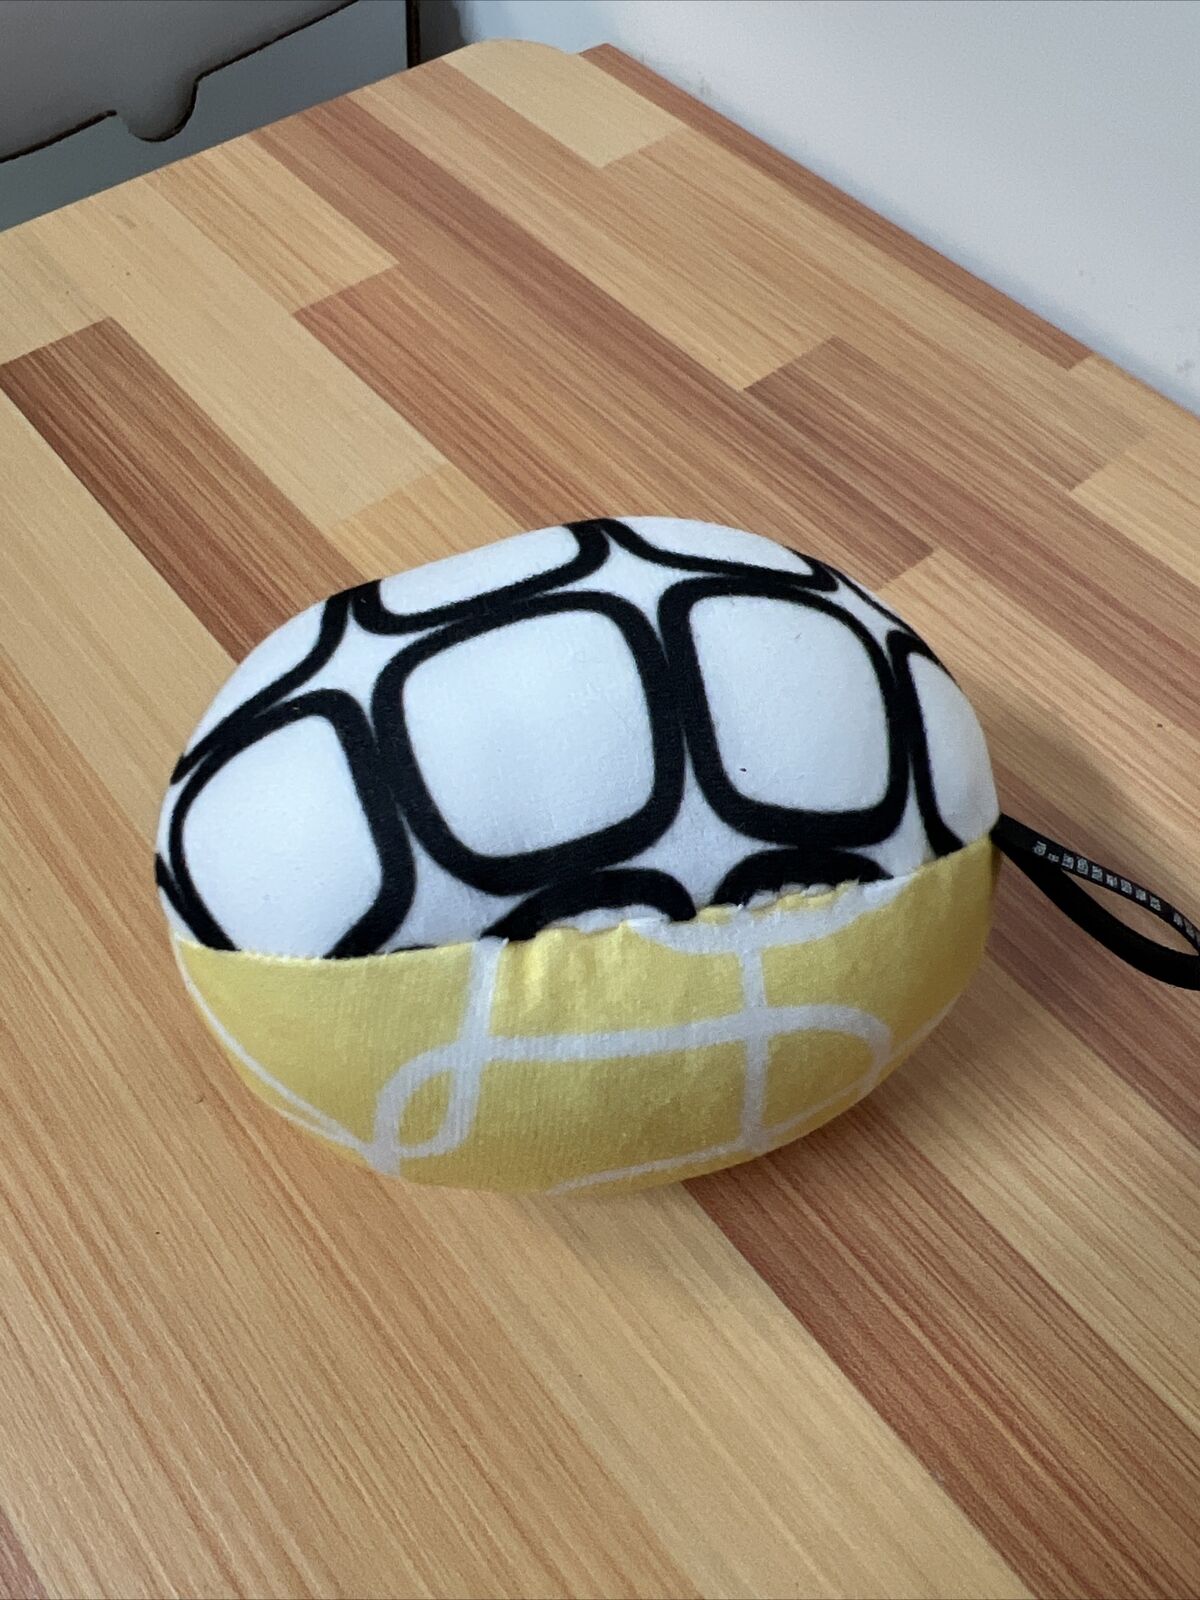 4Moms MamaRoo Plush Mobile Toy Bar Ball Model 1026 1037 Replacement Part YELLOW